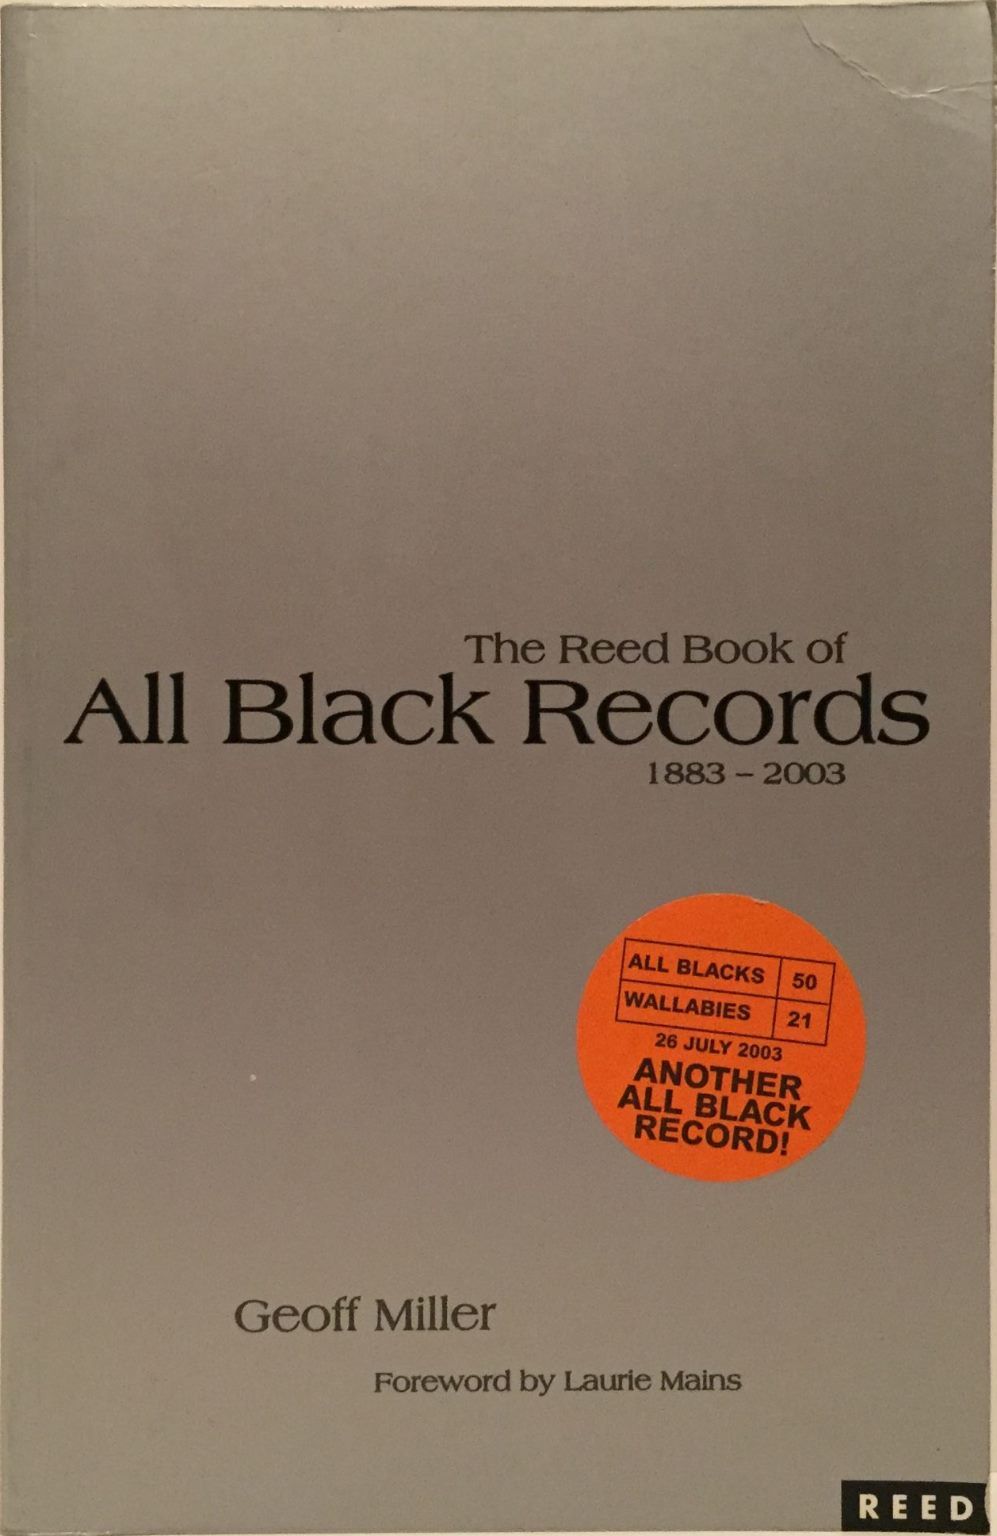 The Reed Book of ALL BLACK RECORDS 1883-2003